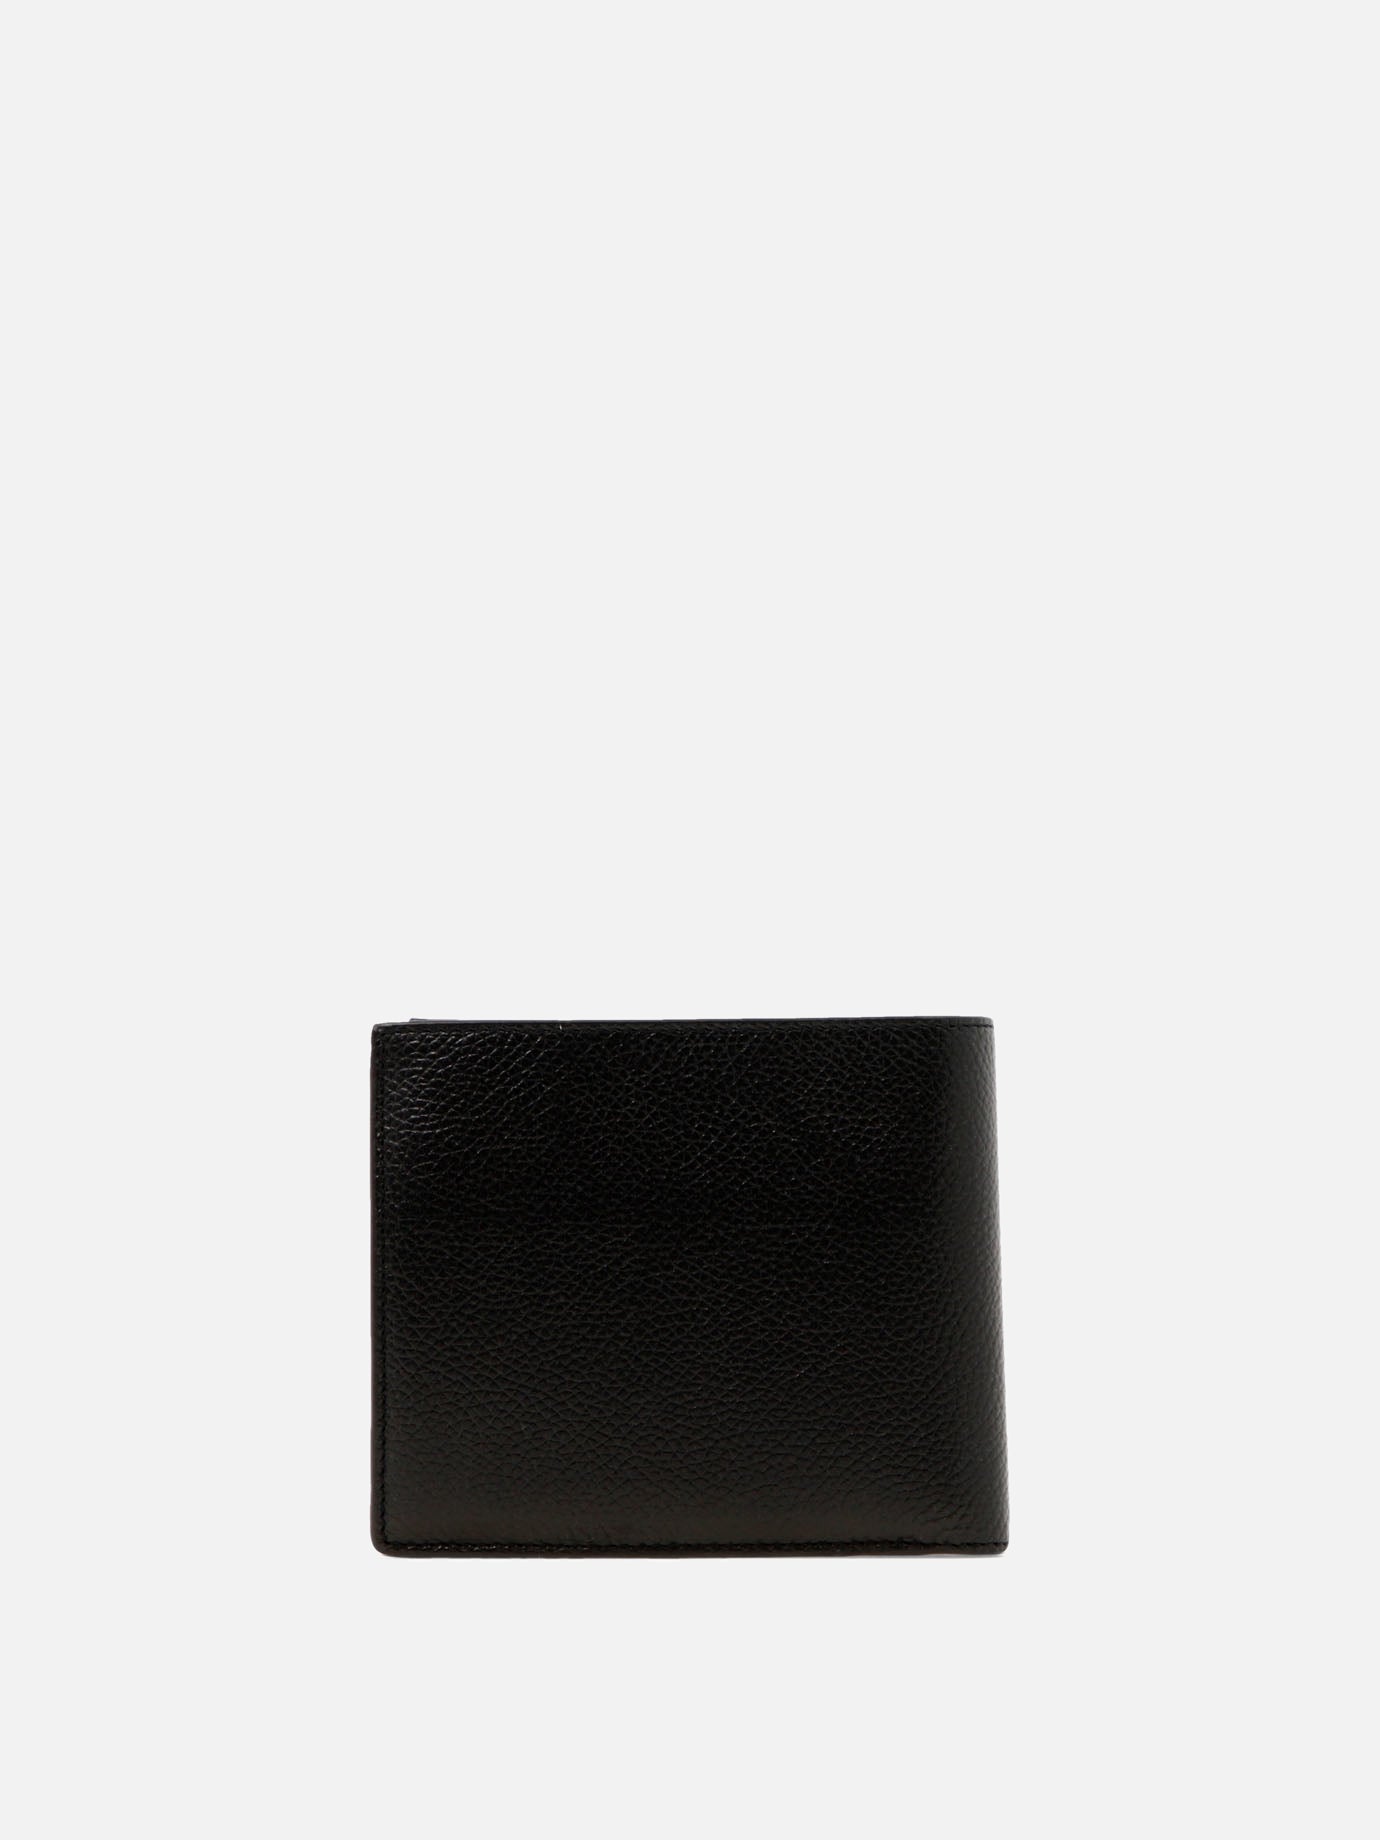 "Cash Square Folded Coin" wallet